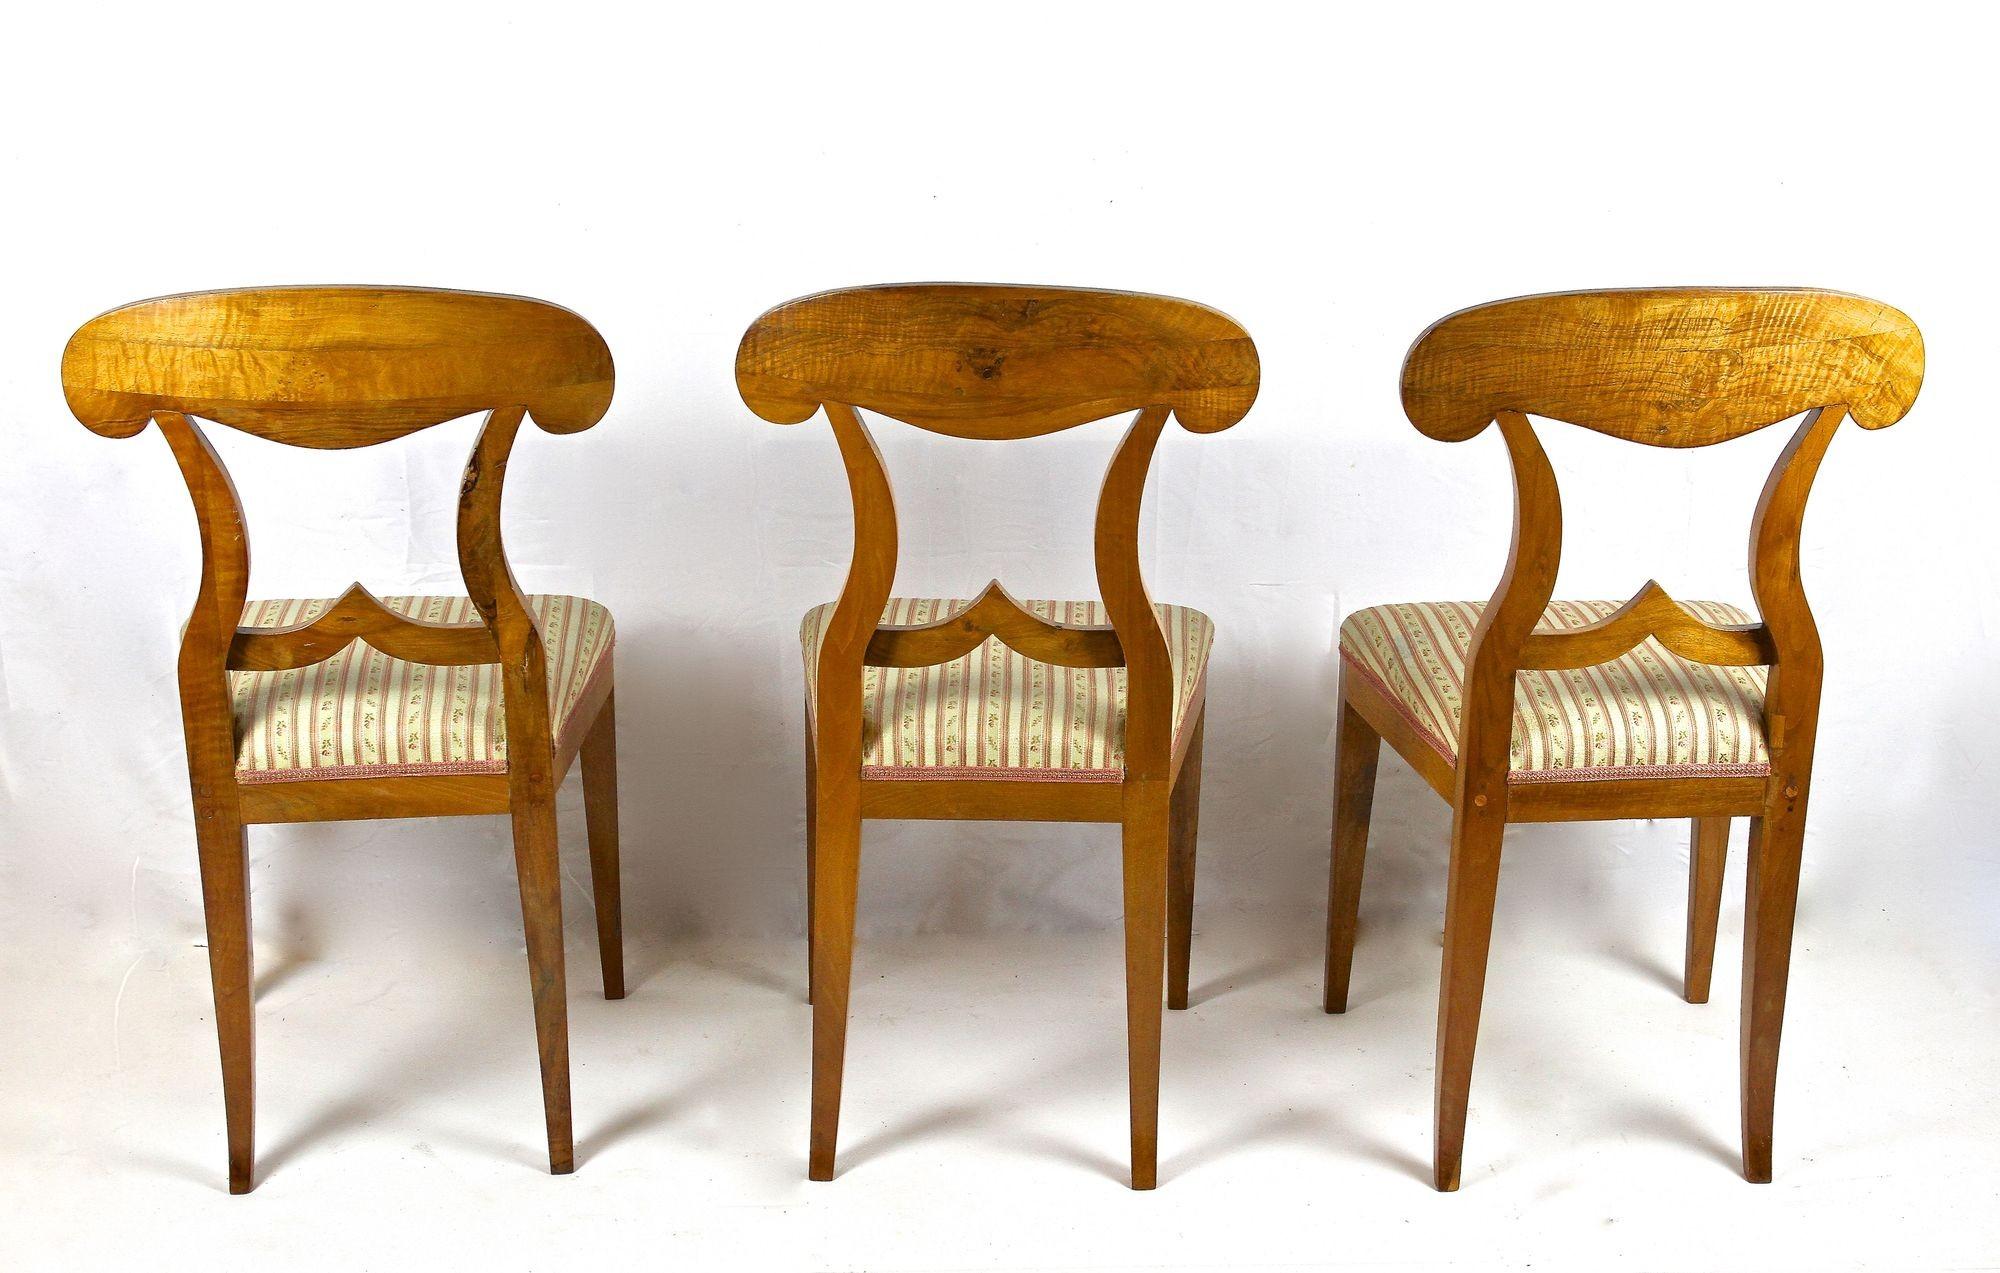 Set Of 6 Biedermeier Nutwood Shovel Dining Chairs, 19th Century, AT ca. 1830 For Sale 2